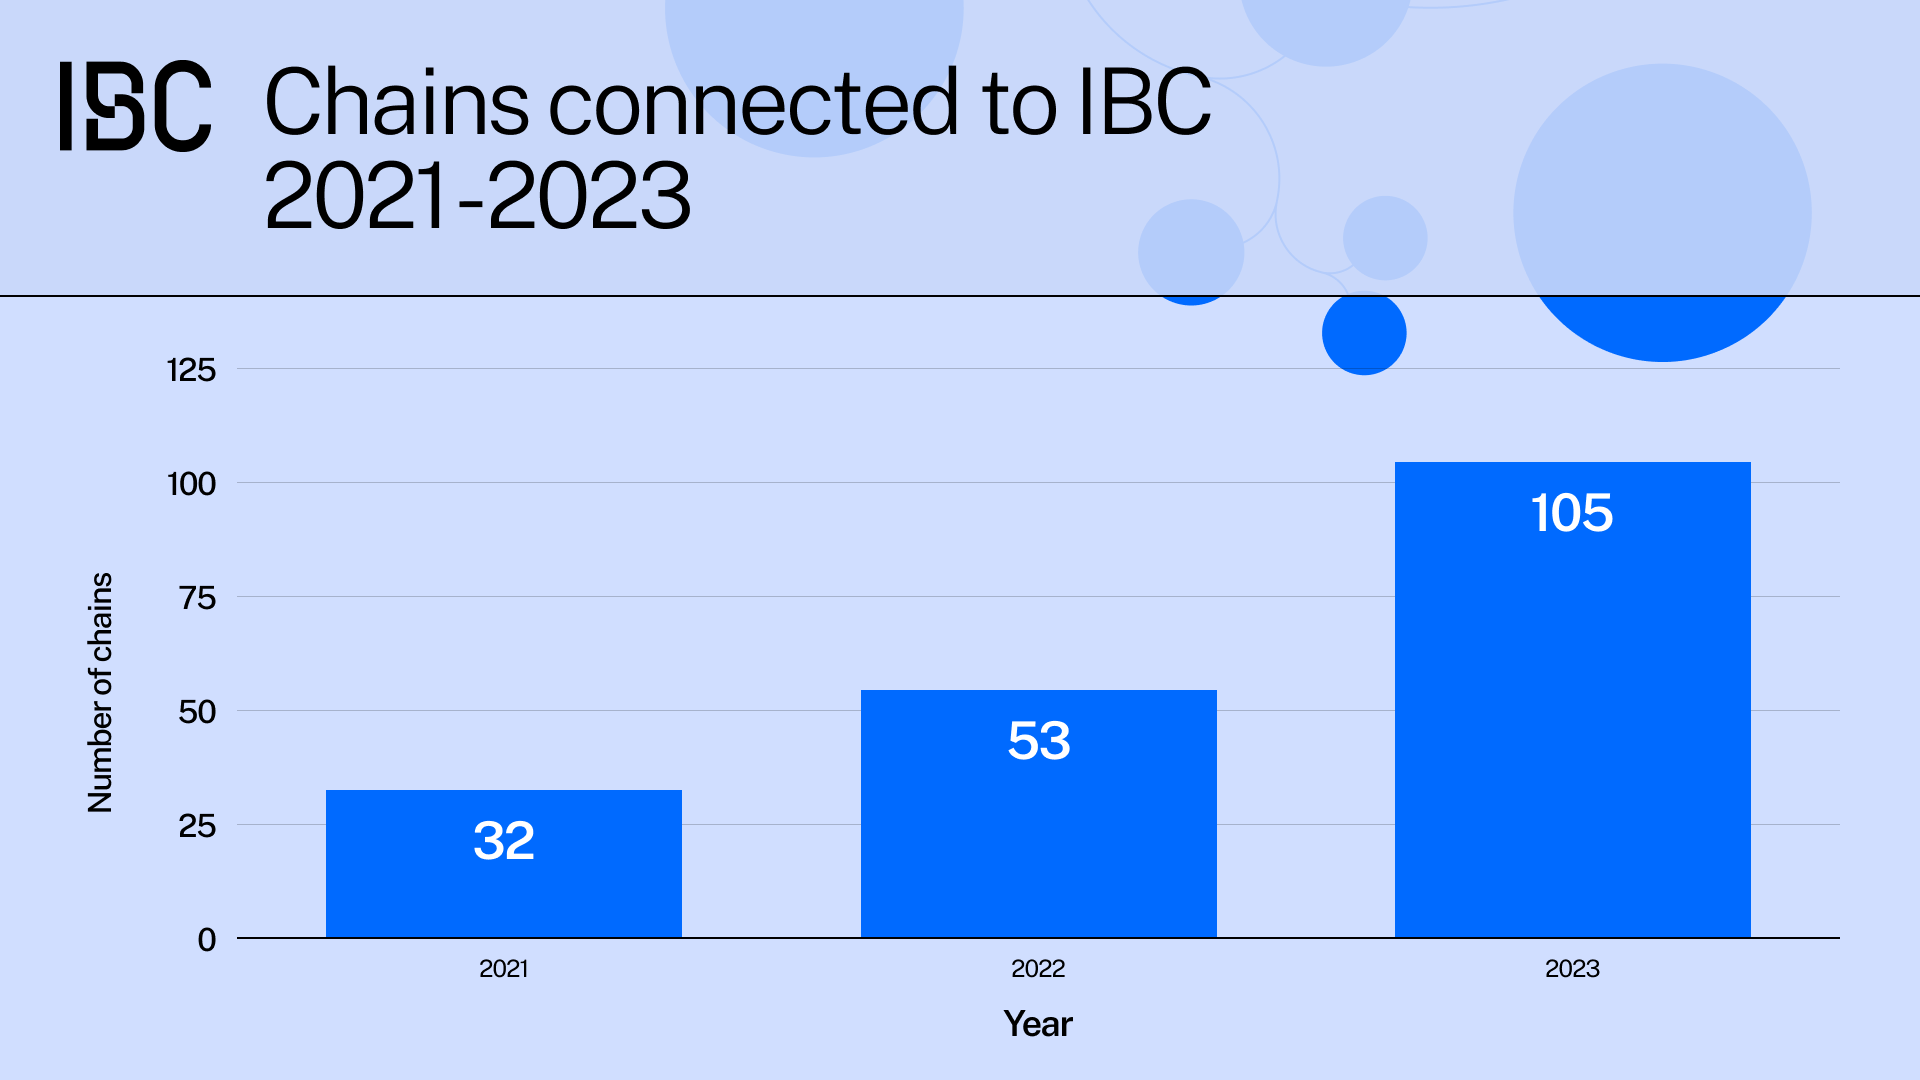 102% more chains connected to IBC in 2023.